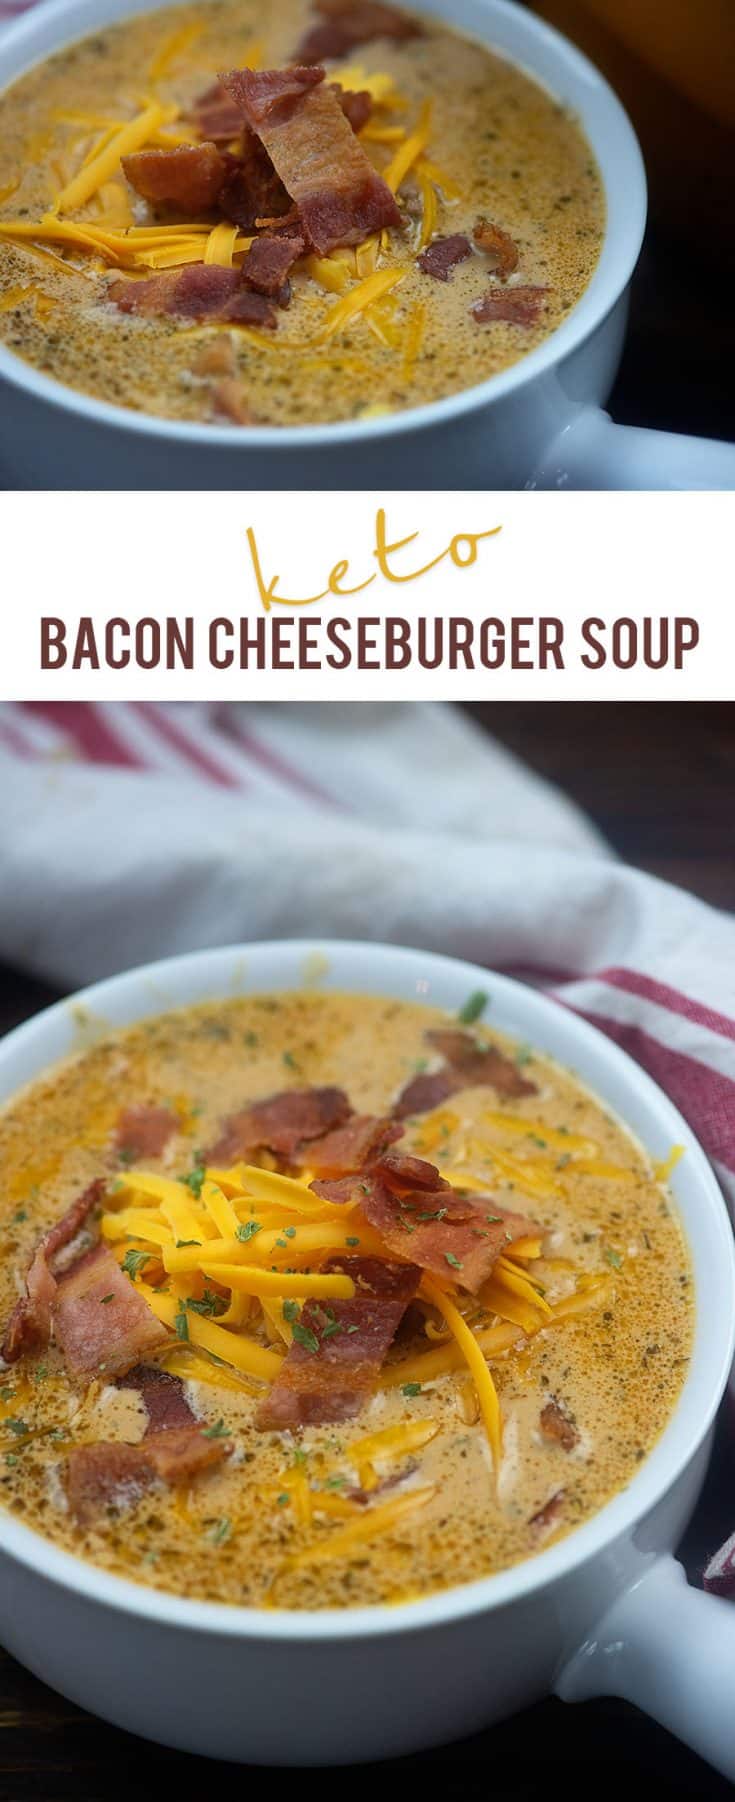 Bacon Cheeseburger Soup | That Low Carb Life